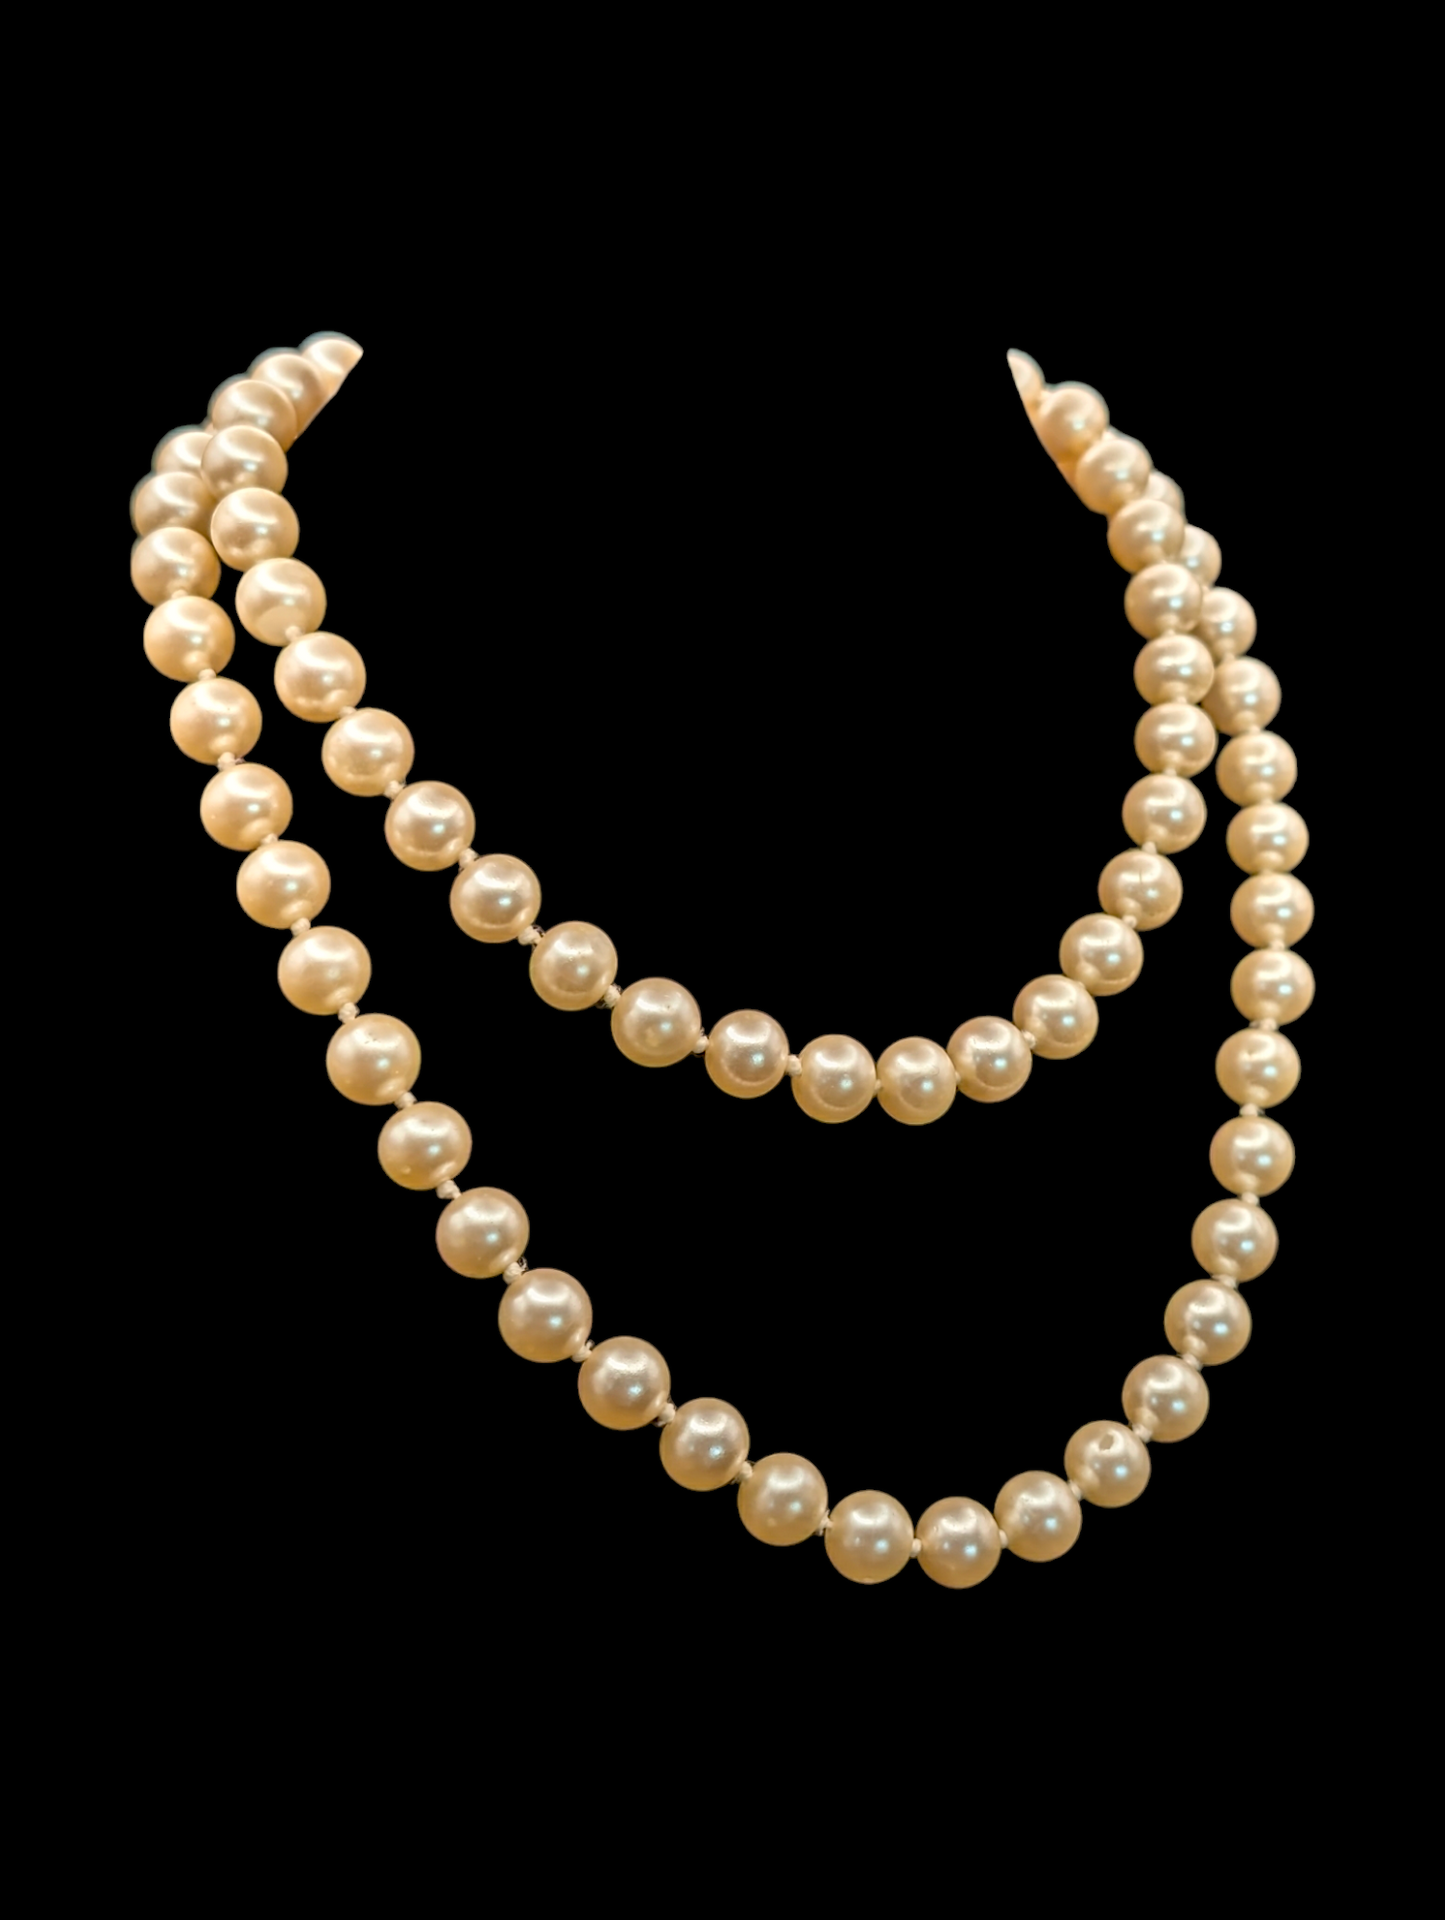 1940s-1960s Soft White Glass Pearl Hand Knotted Single Strand Necklace